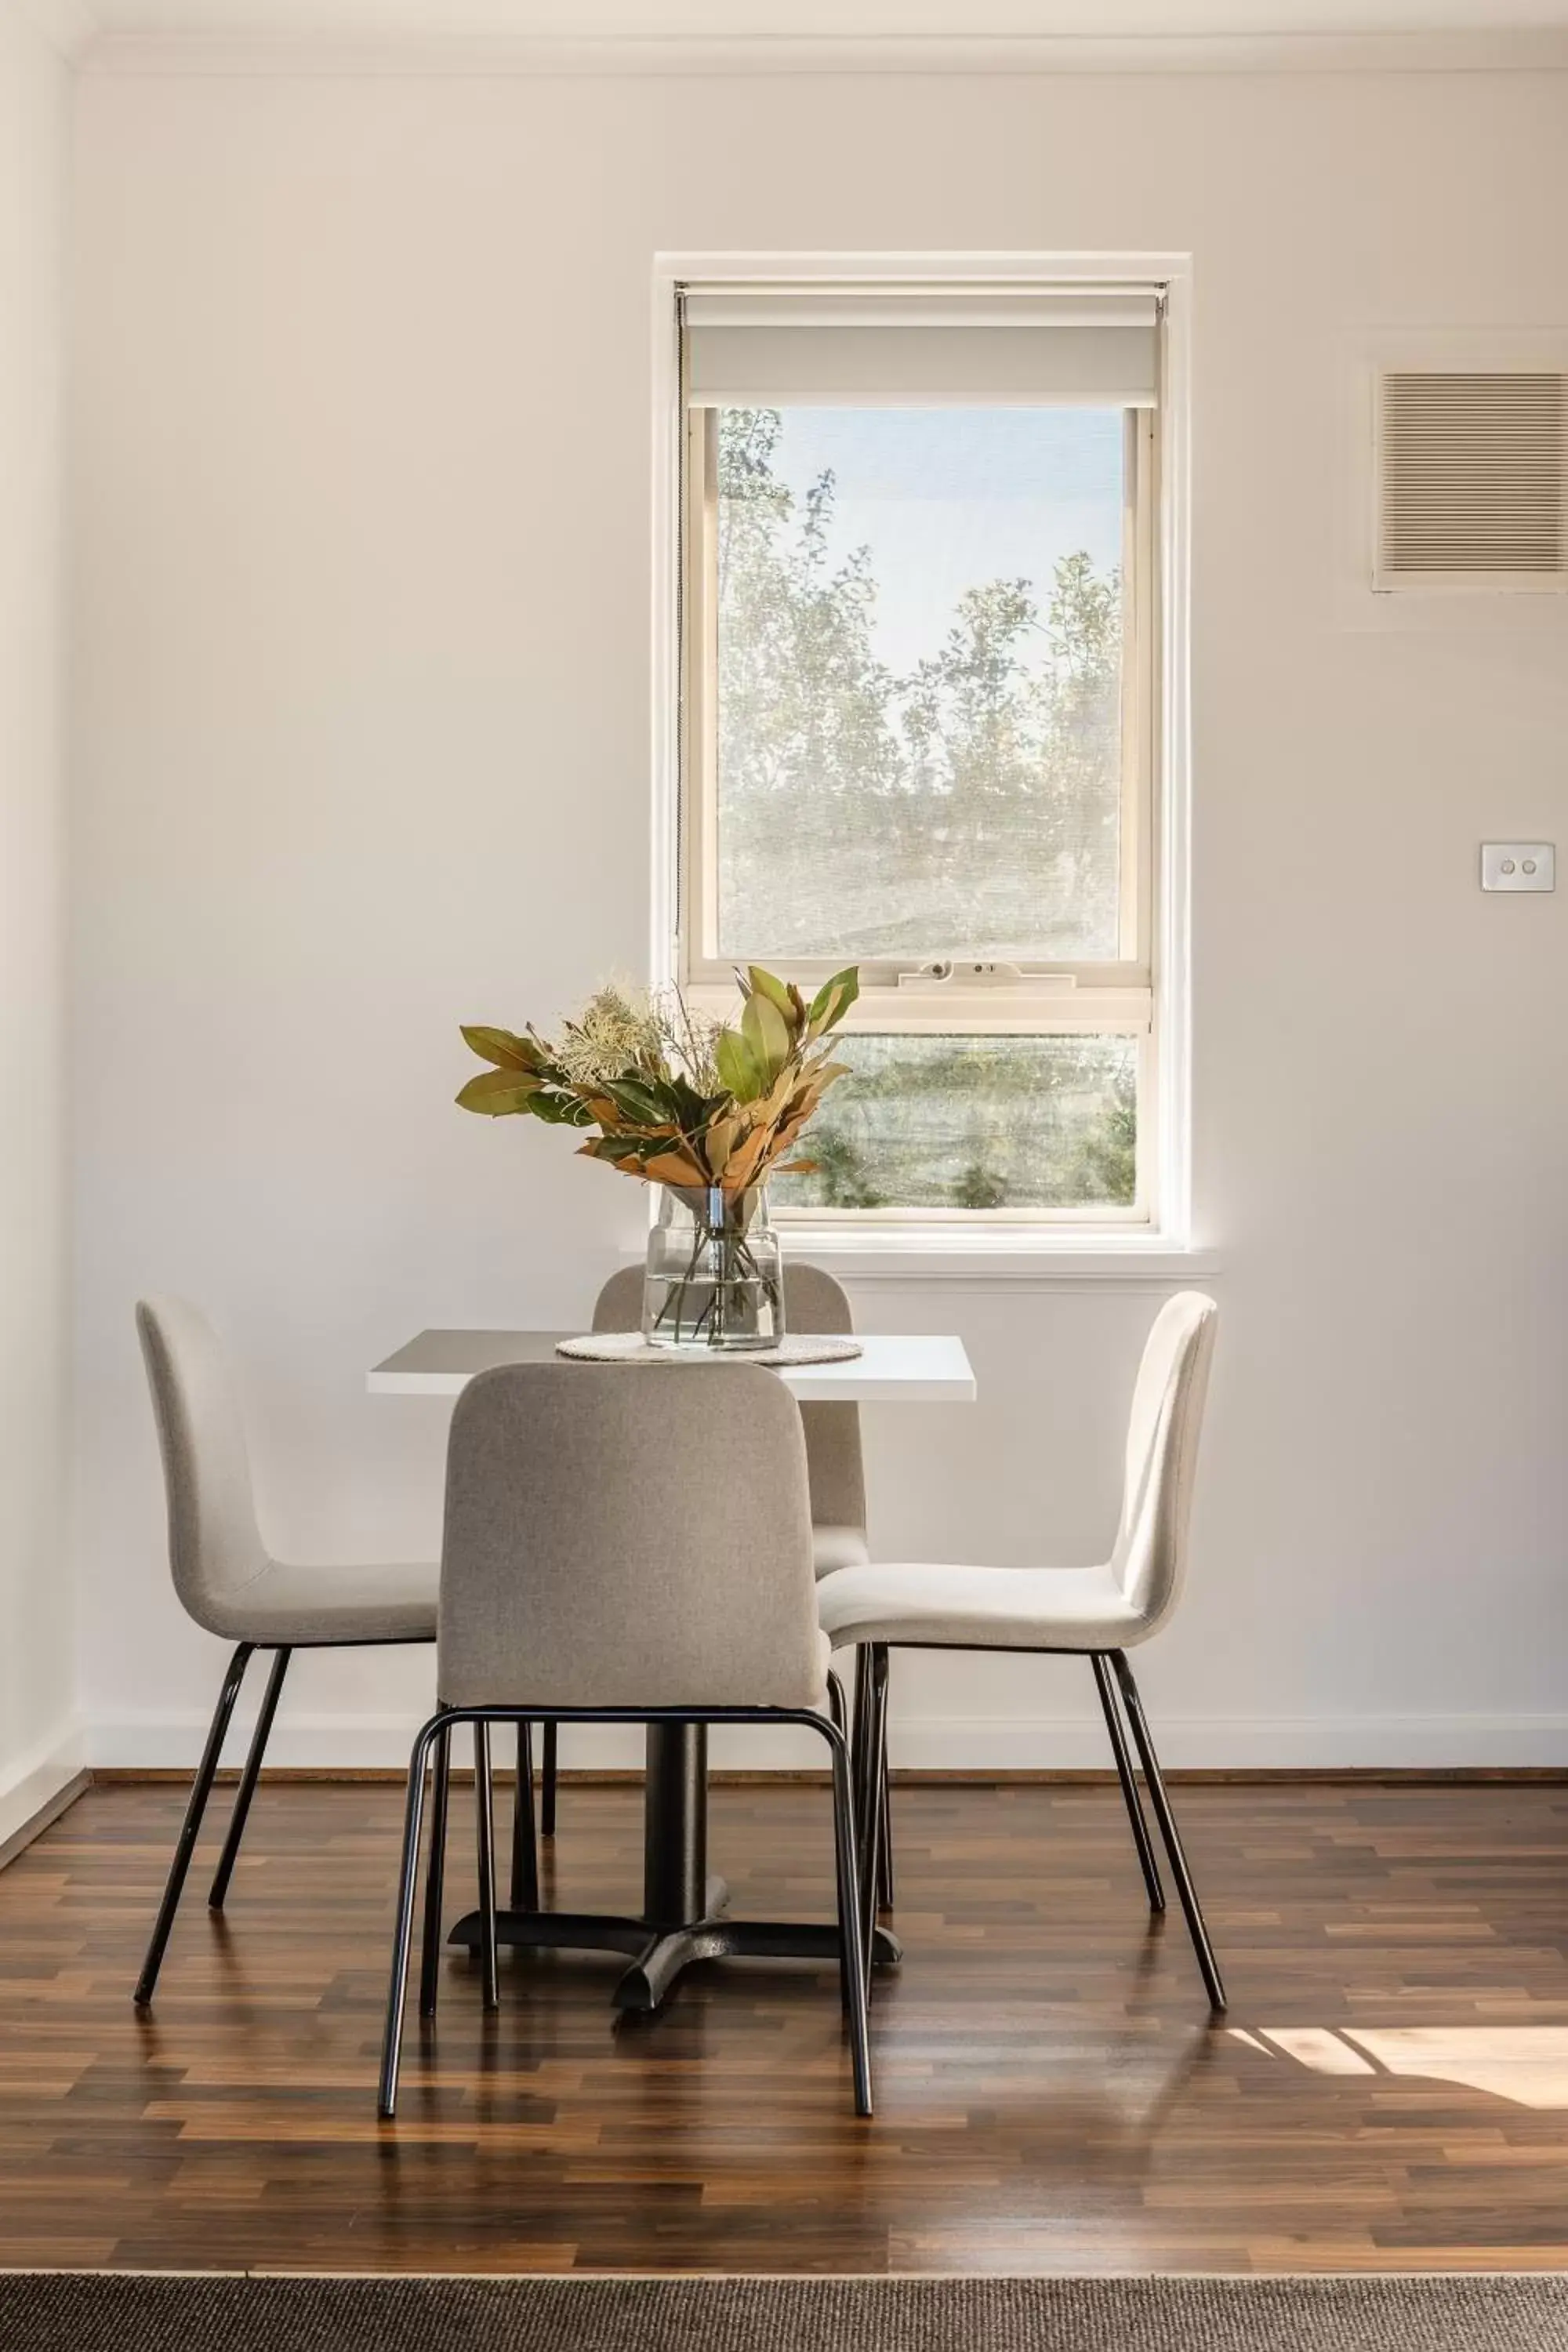 Dining Area in Apartments of South Yarra